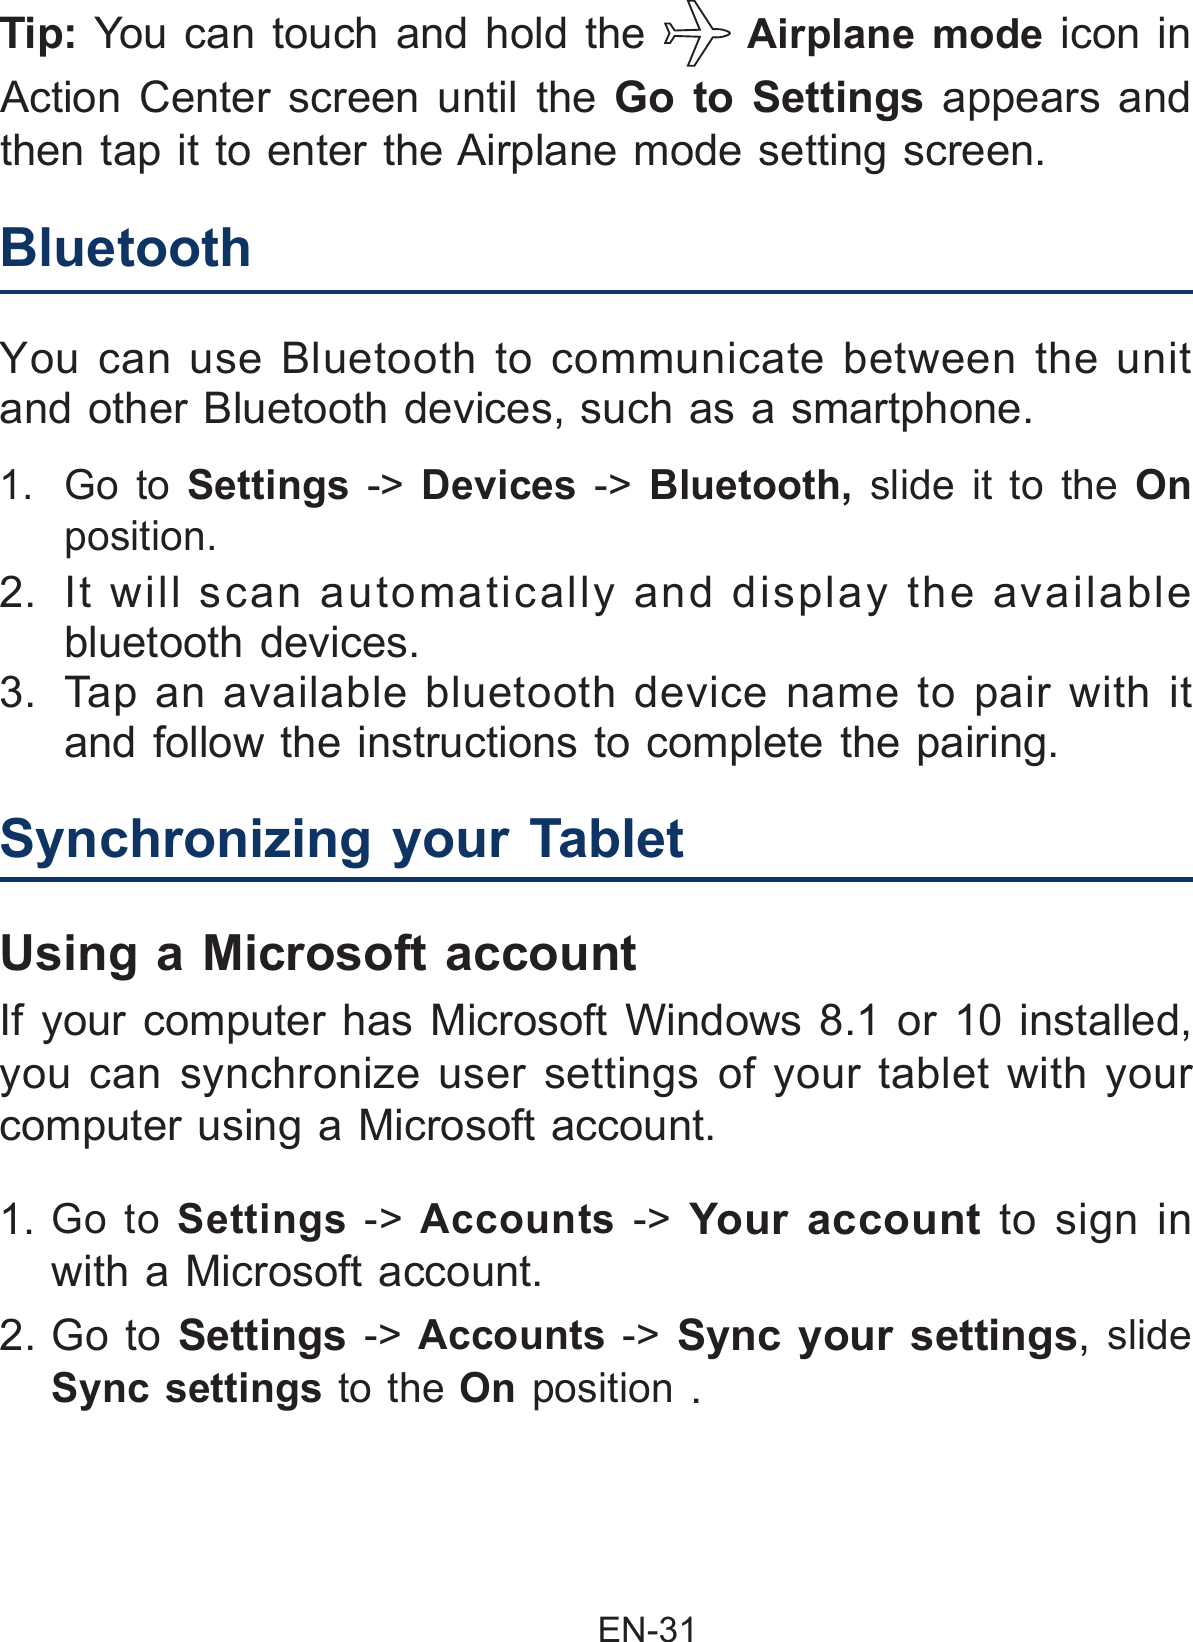                                                EN-31 1. Go to Settings -&gt; Accounts  -&gt; Your account to sign in with a Microsoft account.Synchronizing your Tablet  If your computer has Microsoft Windows 8.1 or 10 installed, you can synchronize user settings of your tablet with your computer using a Microsoft account.Using a Microsoft account2. Go to Settings -&gt;  Accounts  -&gt; Sync your settings, slide Sync settings to the On position .1.  Go to Settings -&gt; Devices  -&gt;  Bluetooth,  slide it to the On position.2.  It will scan automatically and display the available bluetooth devices.  3.  Tap an available bluetooth device name to pair with it and follow the instructions to complete the pairing.Bluetooth  You can use Bluetooth to communicate between the unit and other Bluetooth devices, such as a smartphone.Tip: You can touch and hold the   Airplane mode icon in Action Center screen until the Go to Settings appears and then tap it to enter the Airplane mode setting screen.